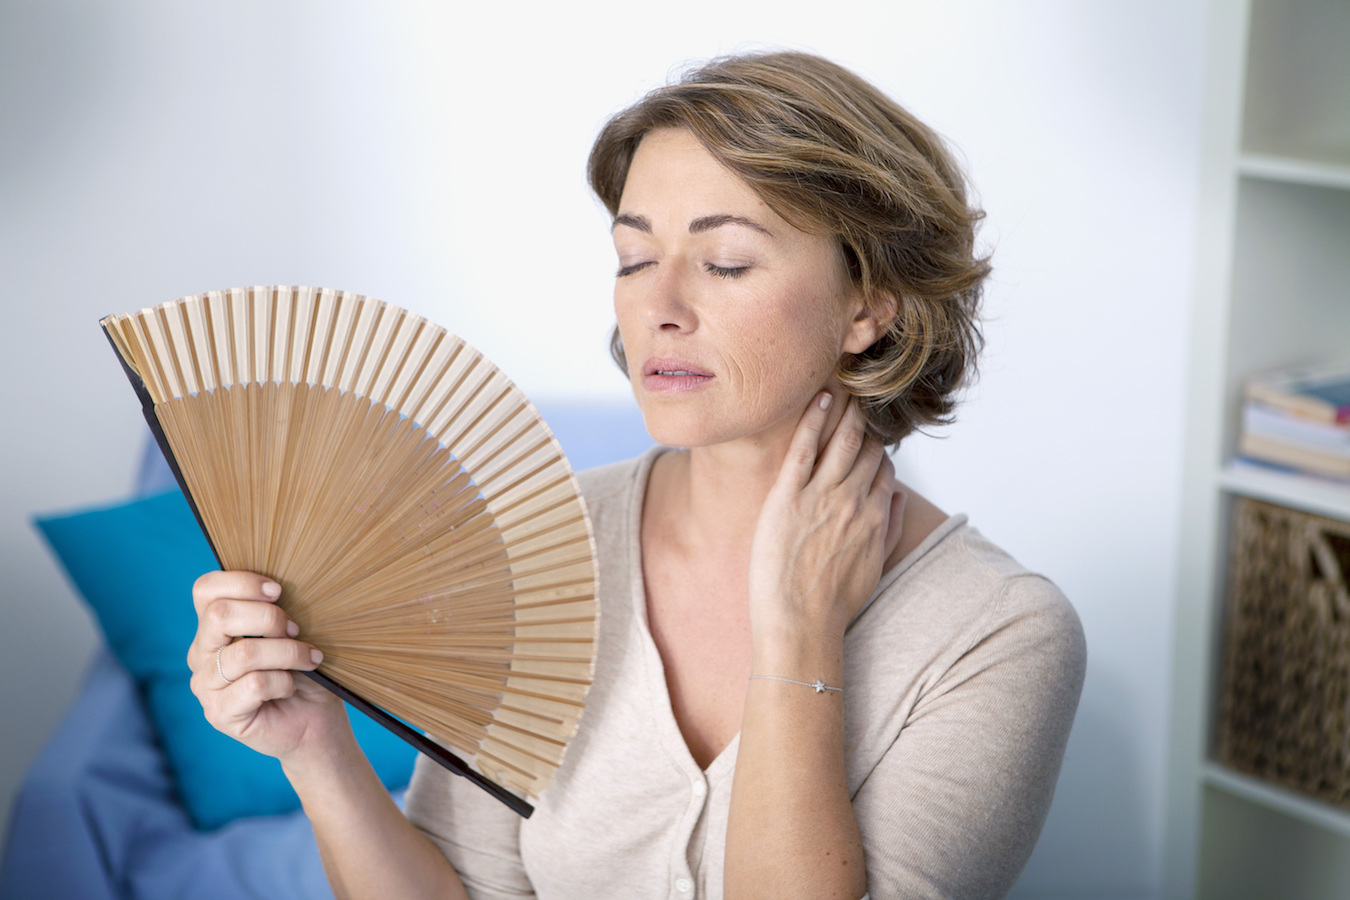 THE POSITIVES OF MENOPAUSE